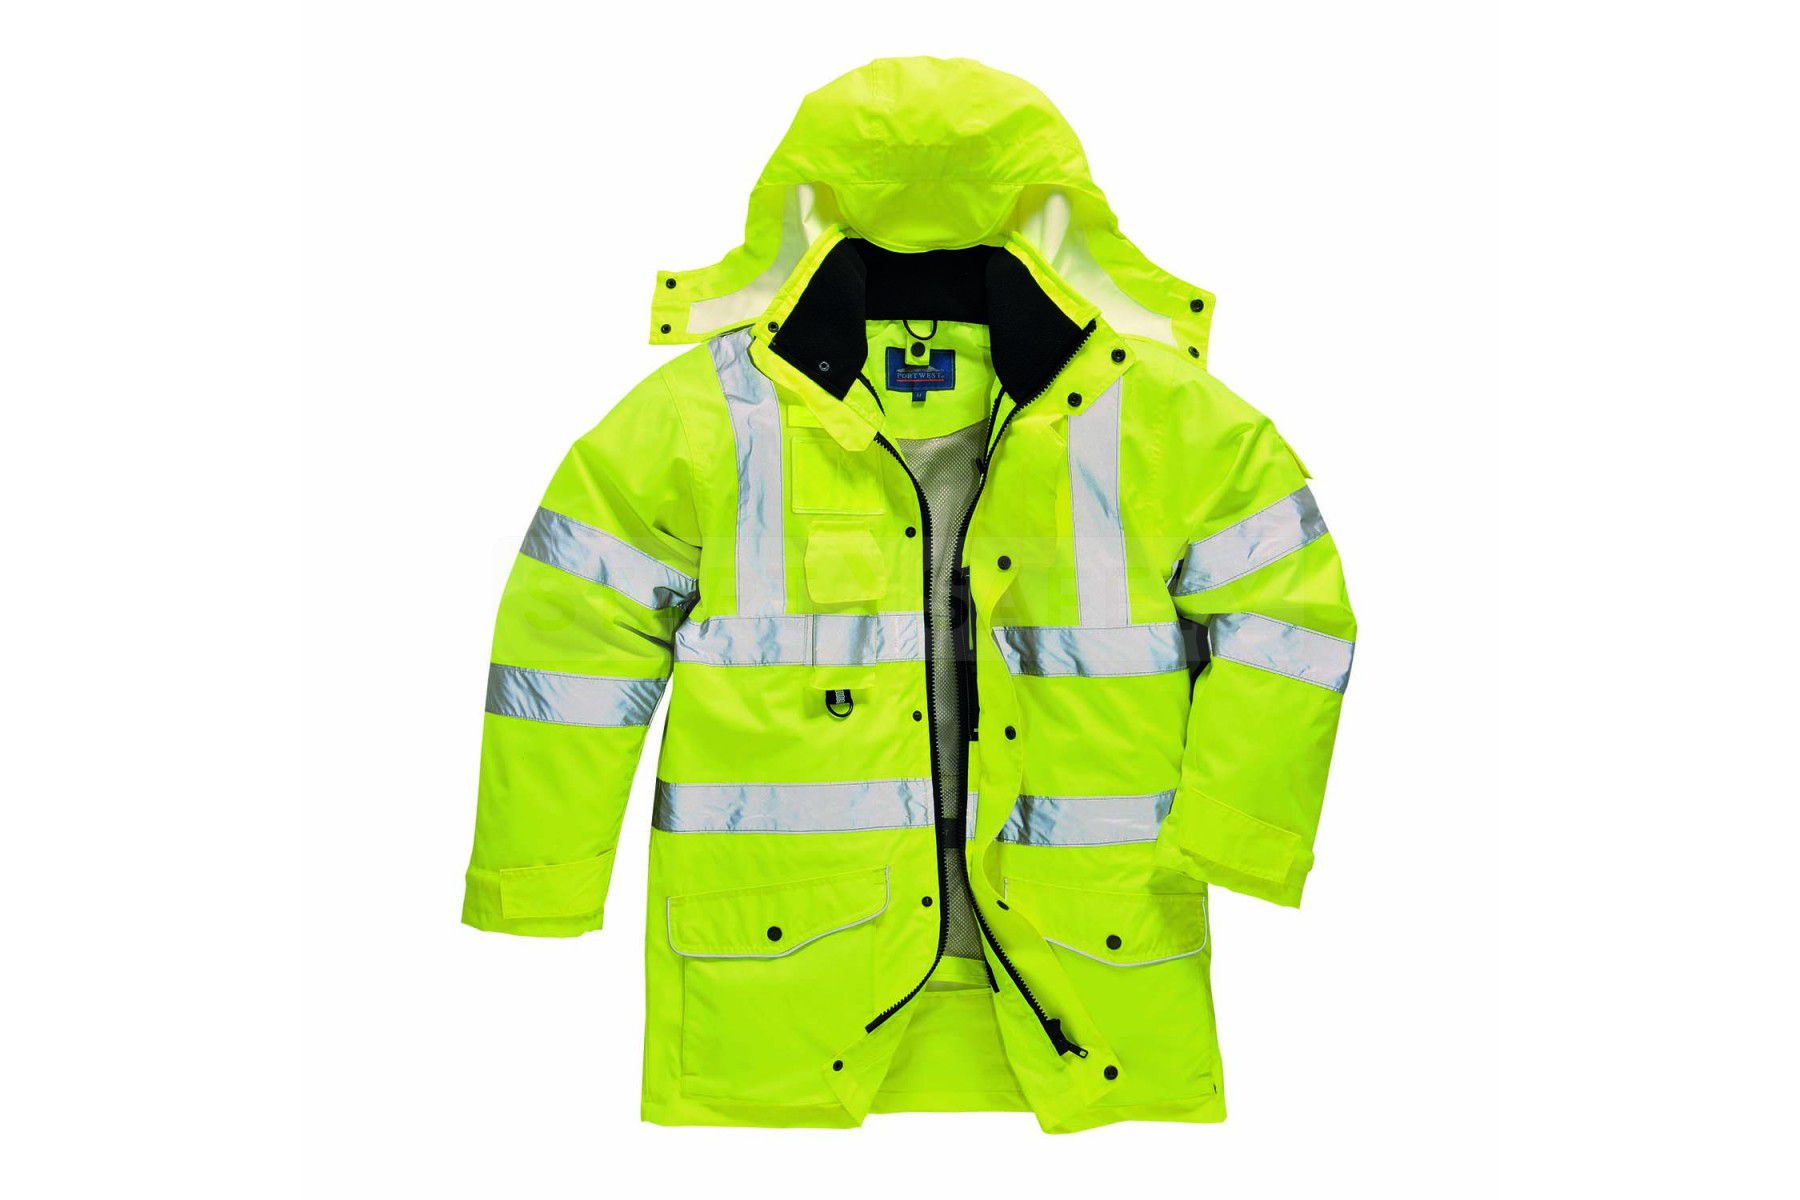 High Visibility Traffic Jacket 7in1 Design Class 3 ANSI